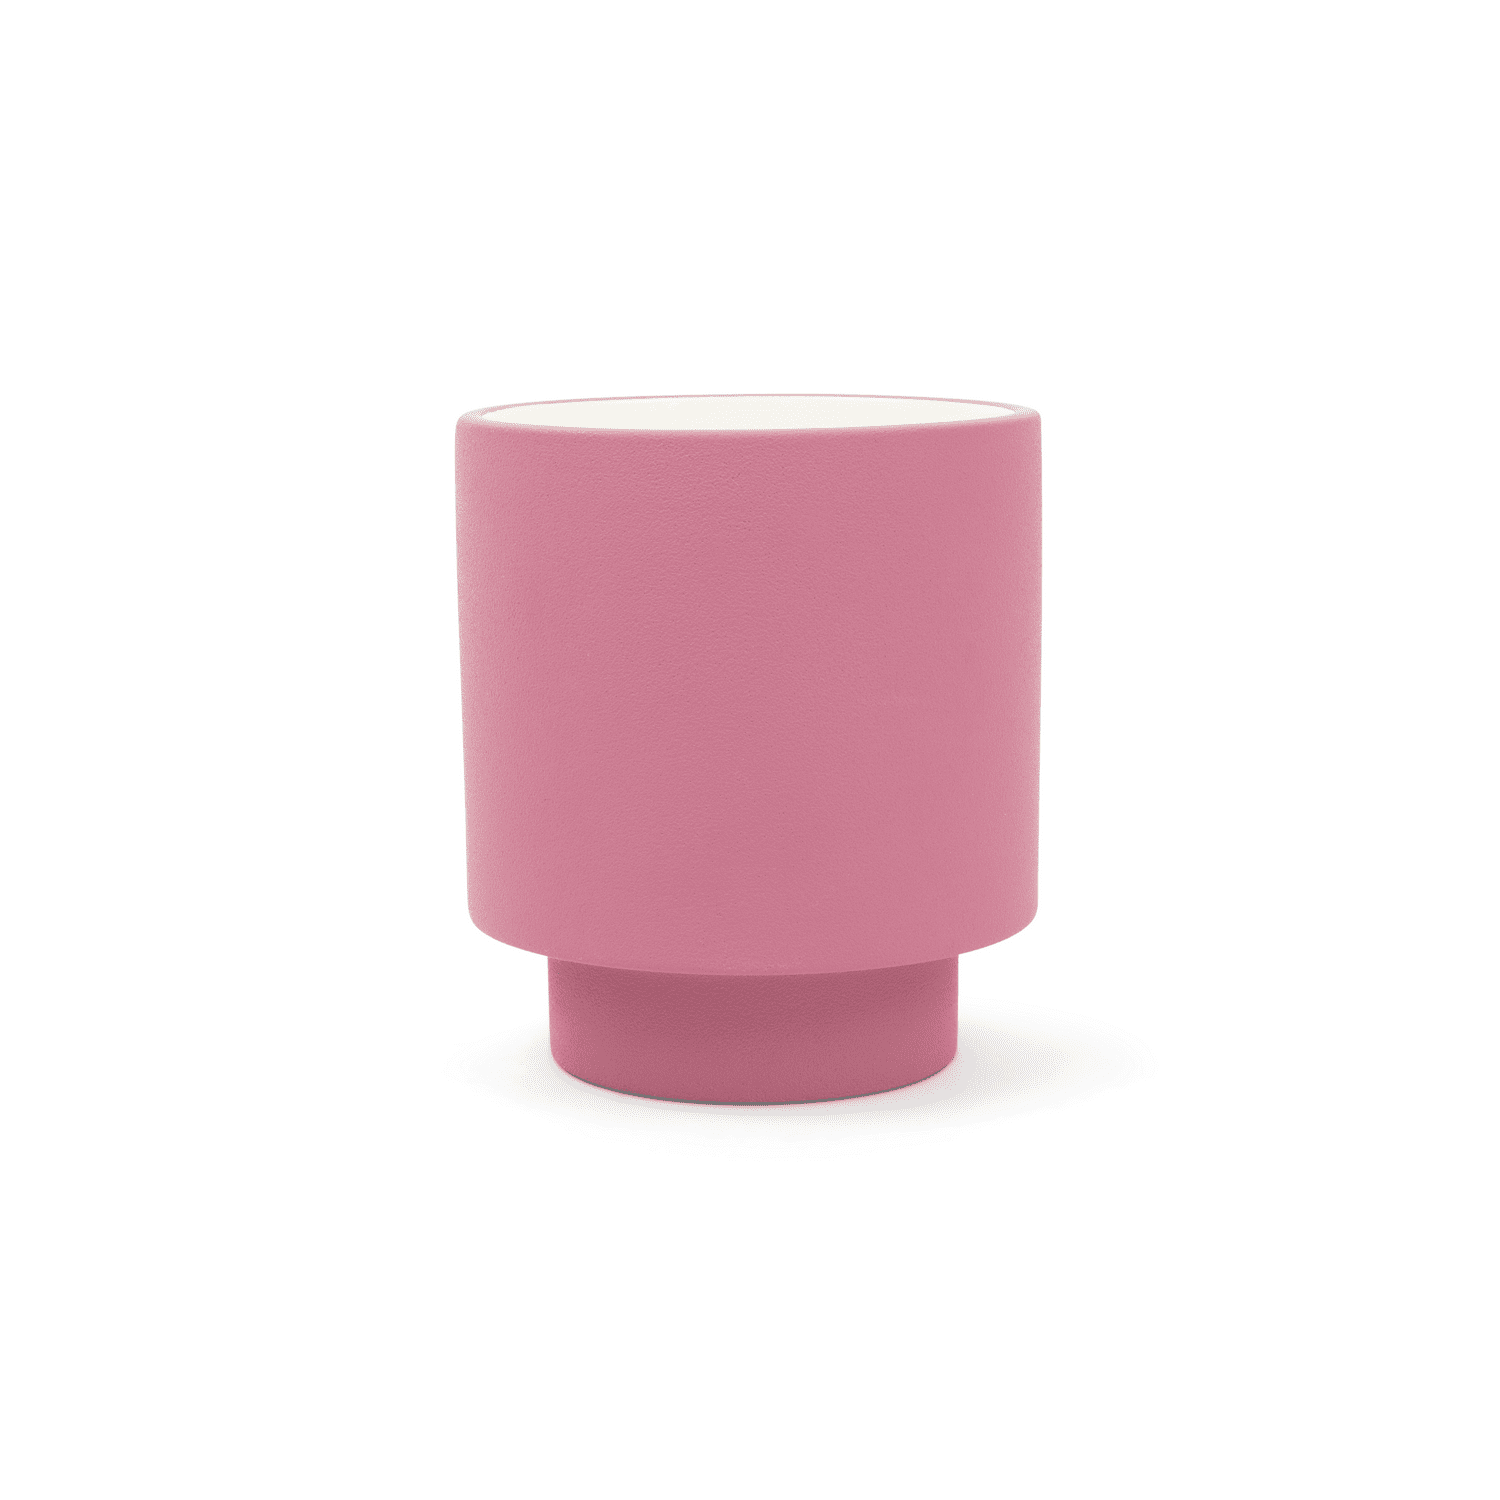 14-Oz Better Homes & Gardens Single Wick Ceramic Candle (Rhubarb & Rose) $2.10 + Free S&H w/ Walmart+ or $35+